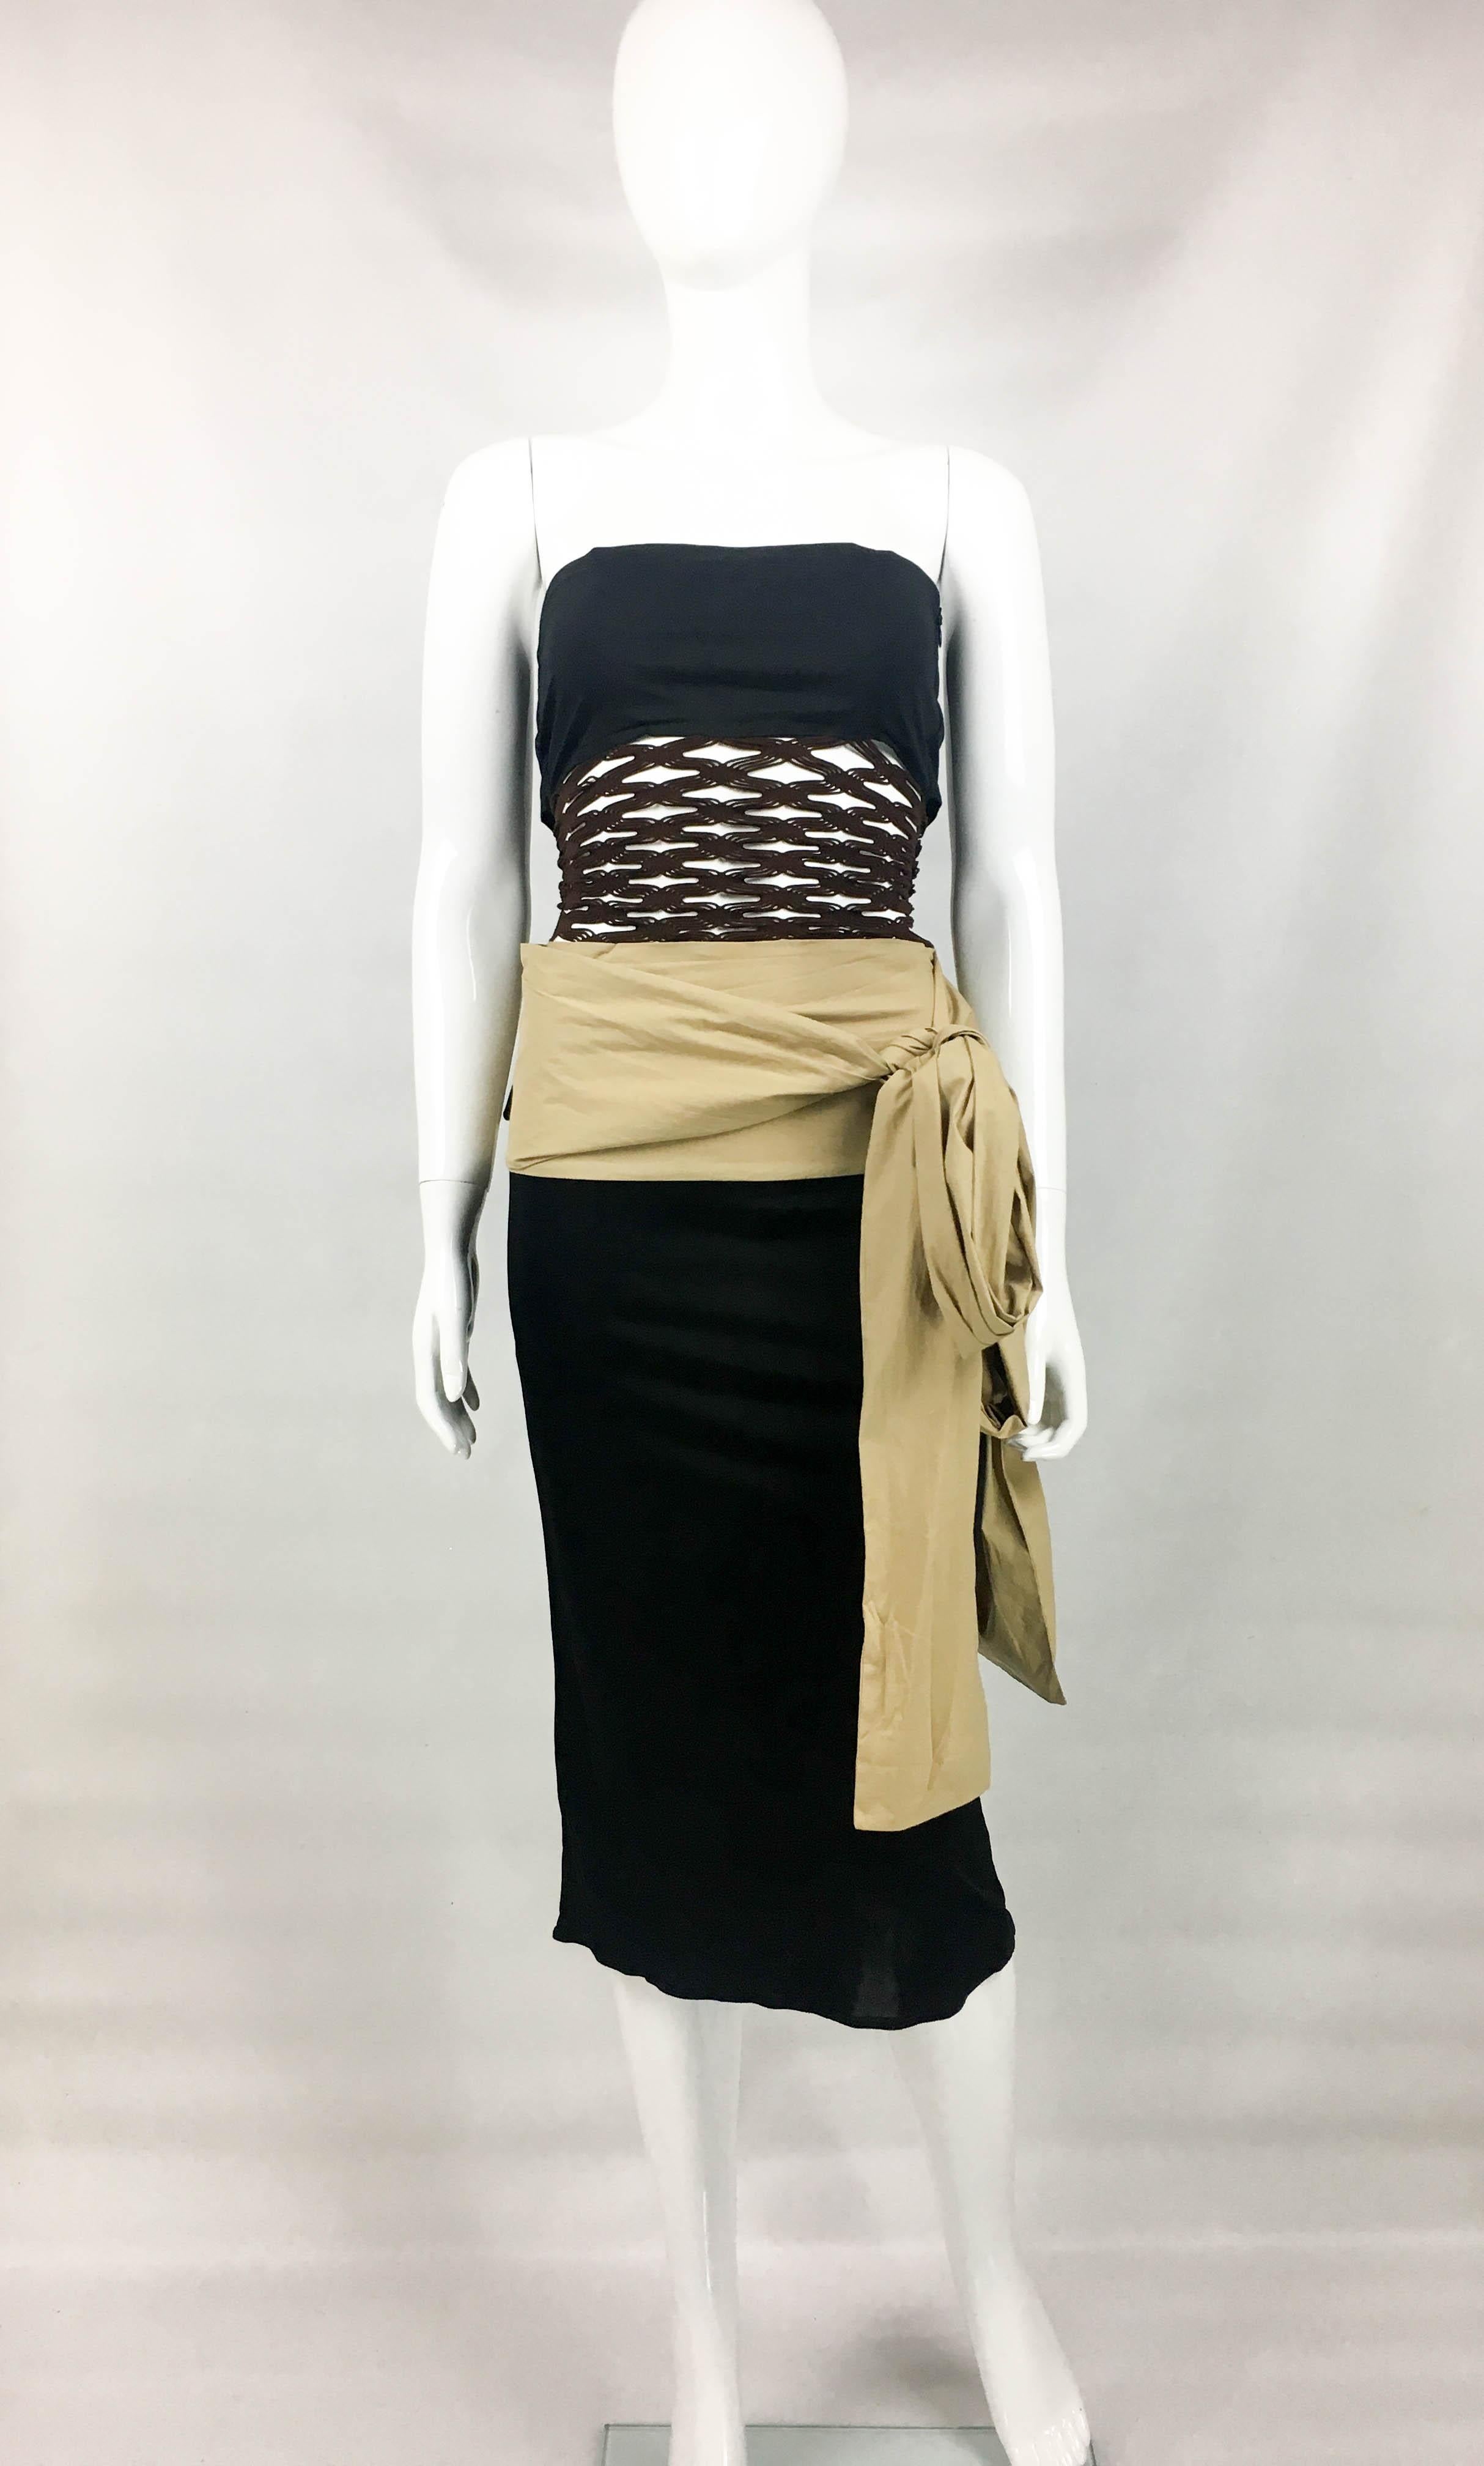 Vintage Jean Paul Gaultier Dress. This striking dress by Jean Paul Gaultier dates back from the 1990’s. Of interesting design, it features black and beige body and brown elastic net panel to torso. The beige and black sash-style details to the hip